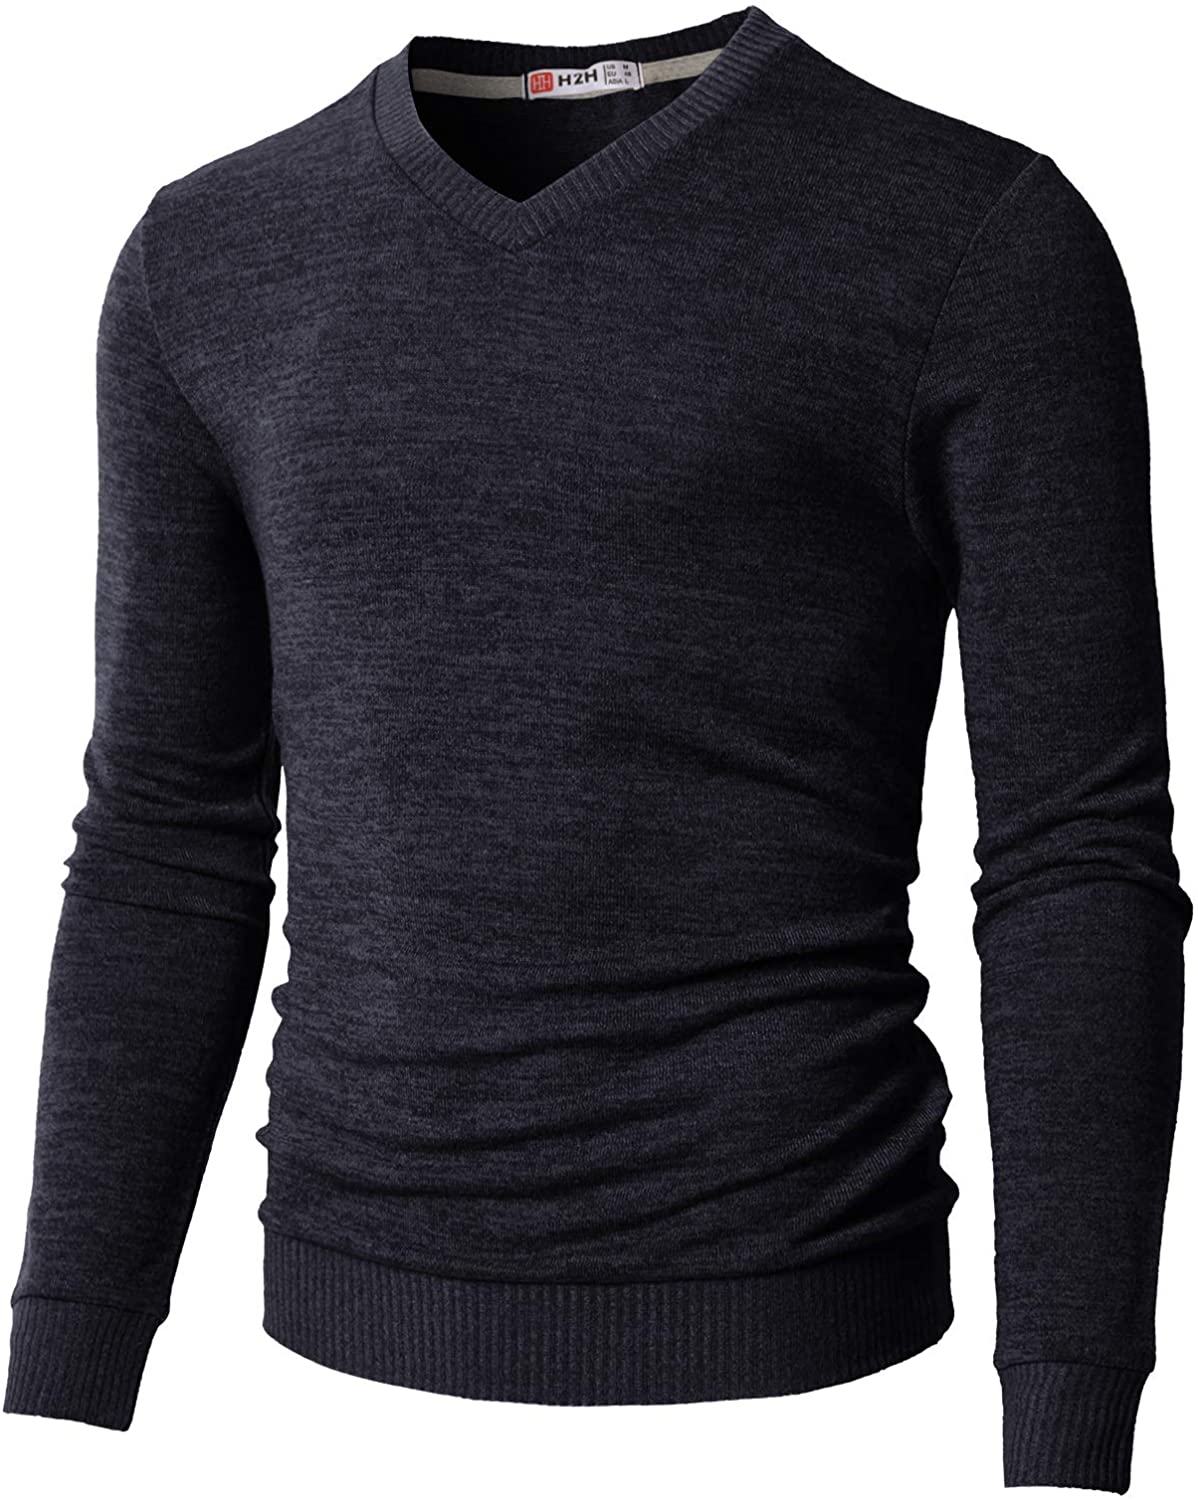 H2H Mens Casual Slim Fit Pullover Sweaters Knitted Tops Lightweight ...